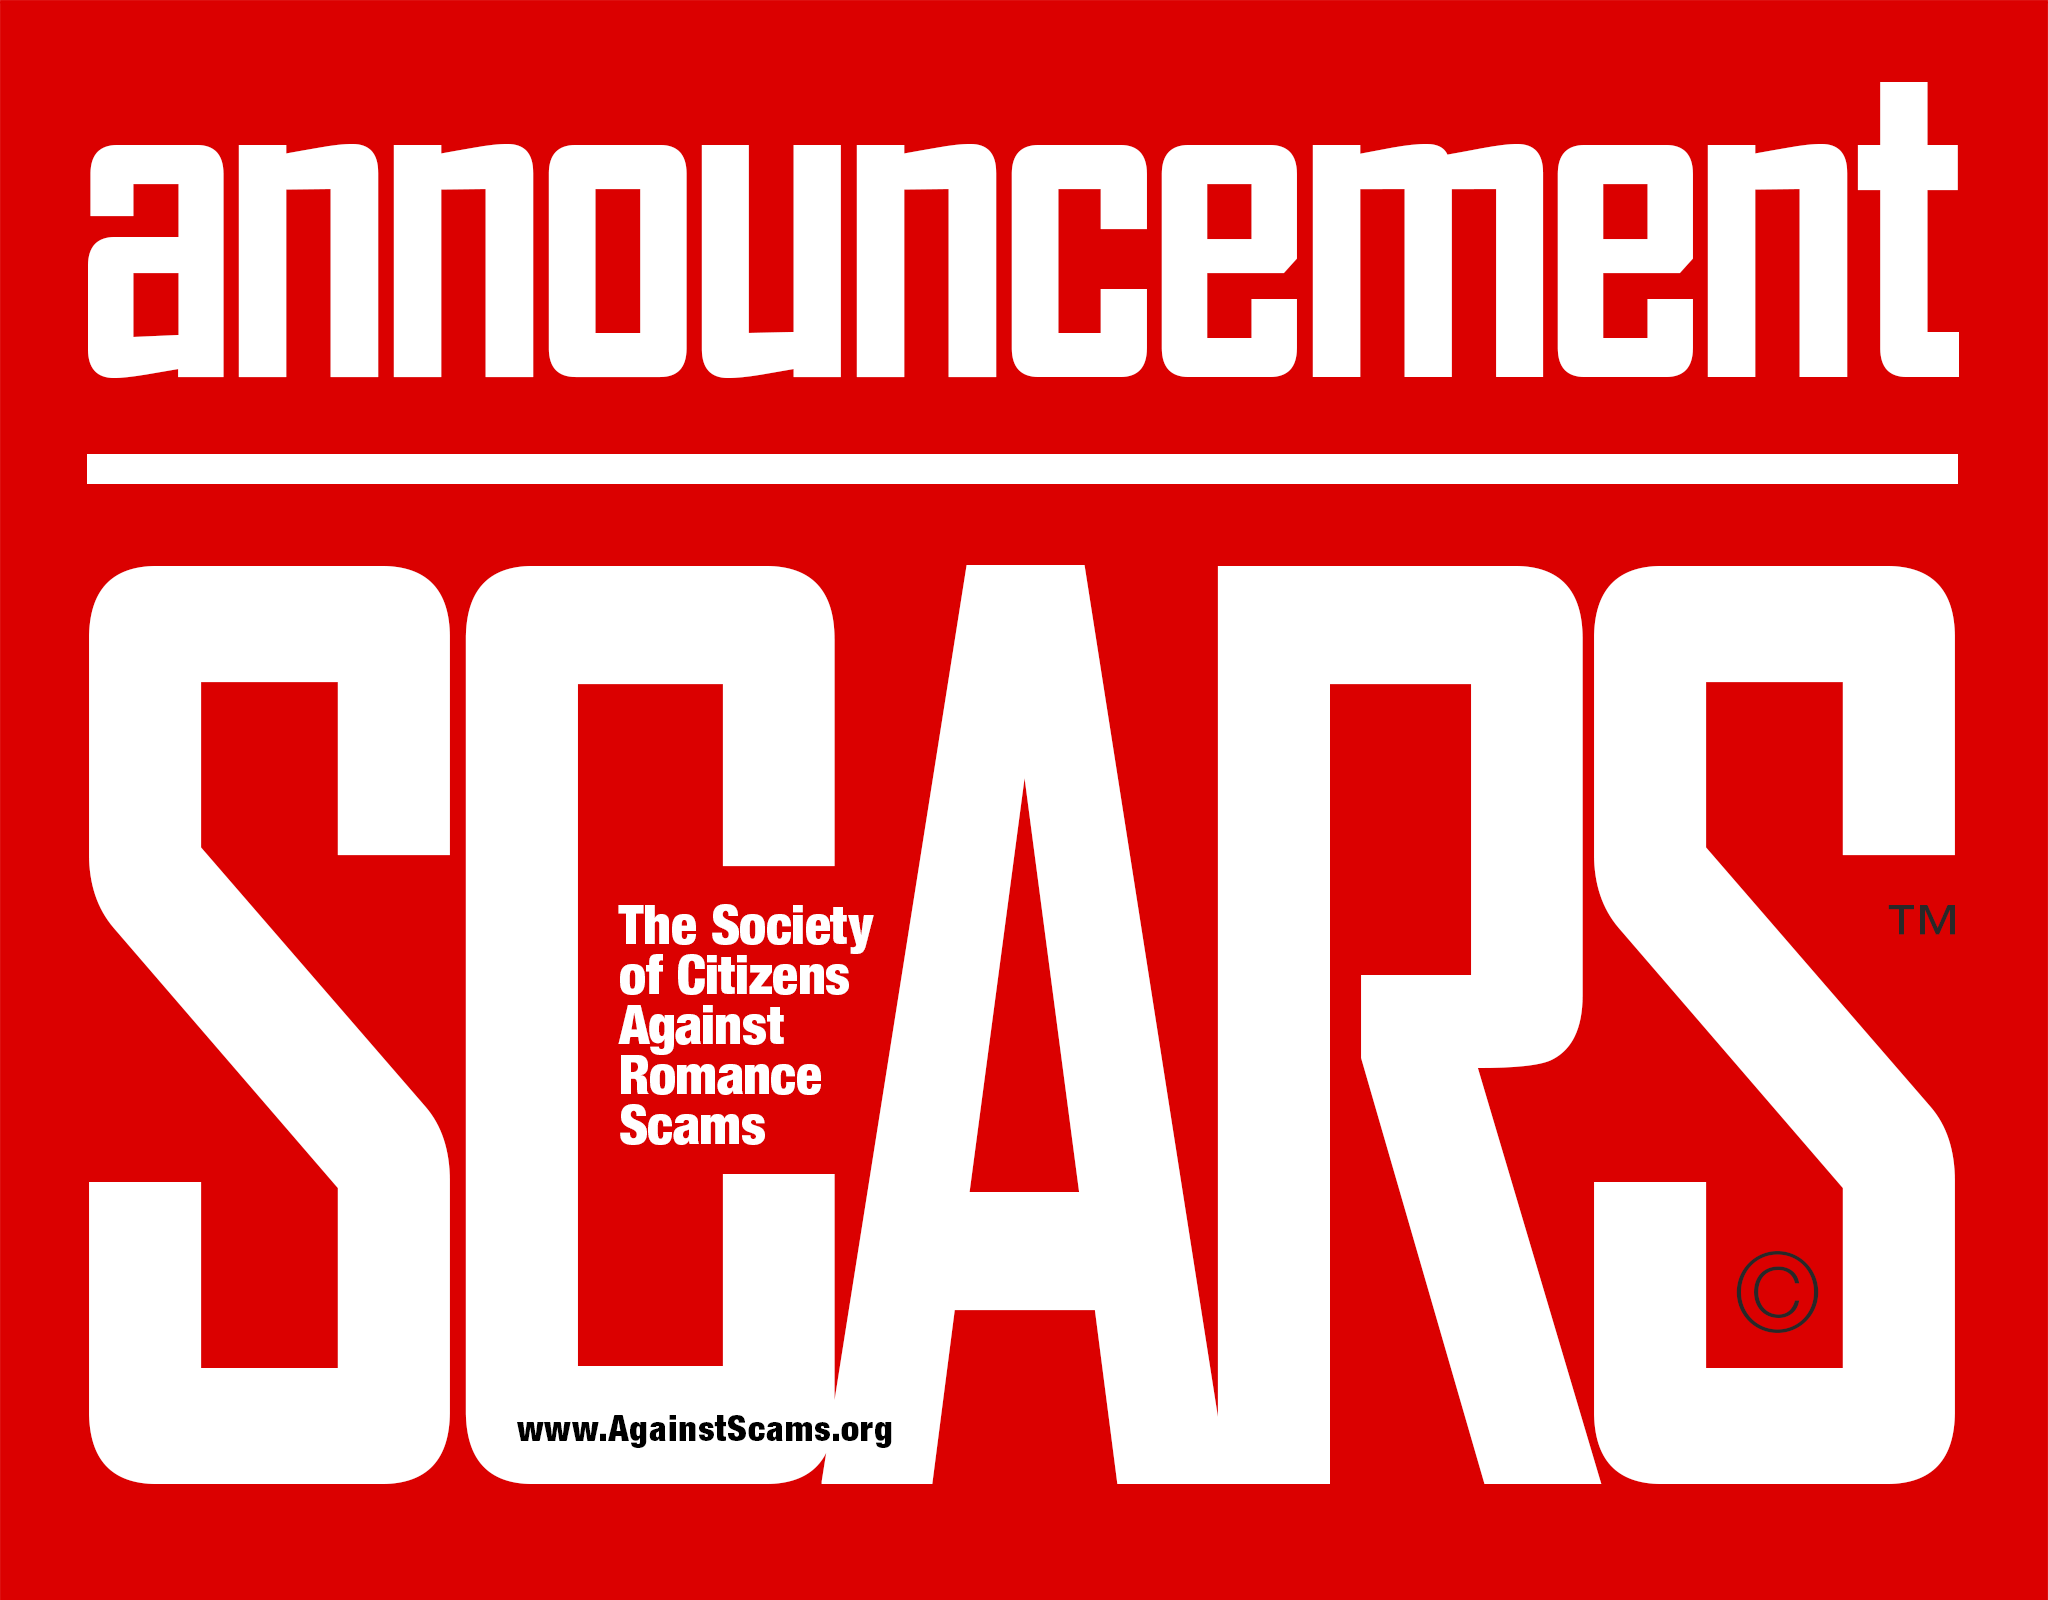 Society of Citizens Against Romance Scams - SCARS - Announcement - banner